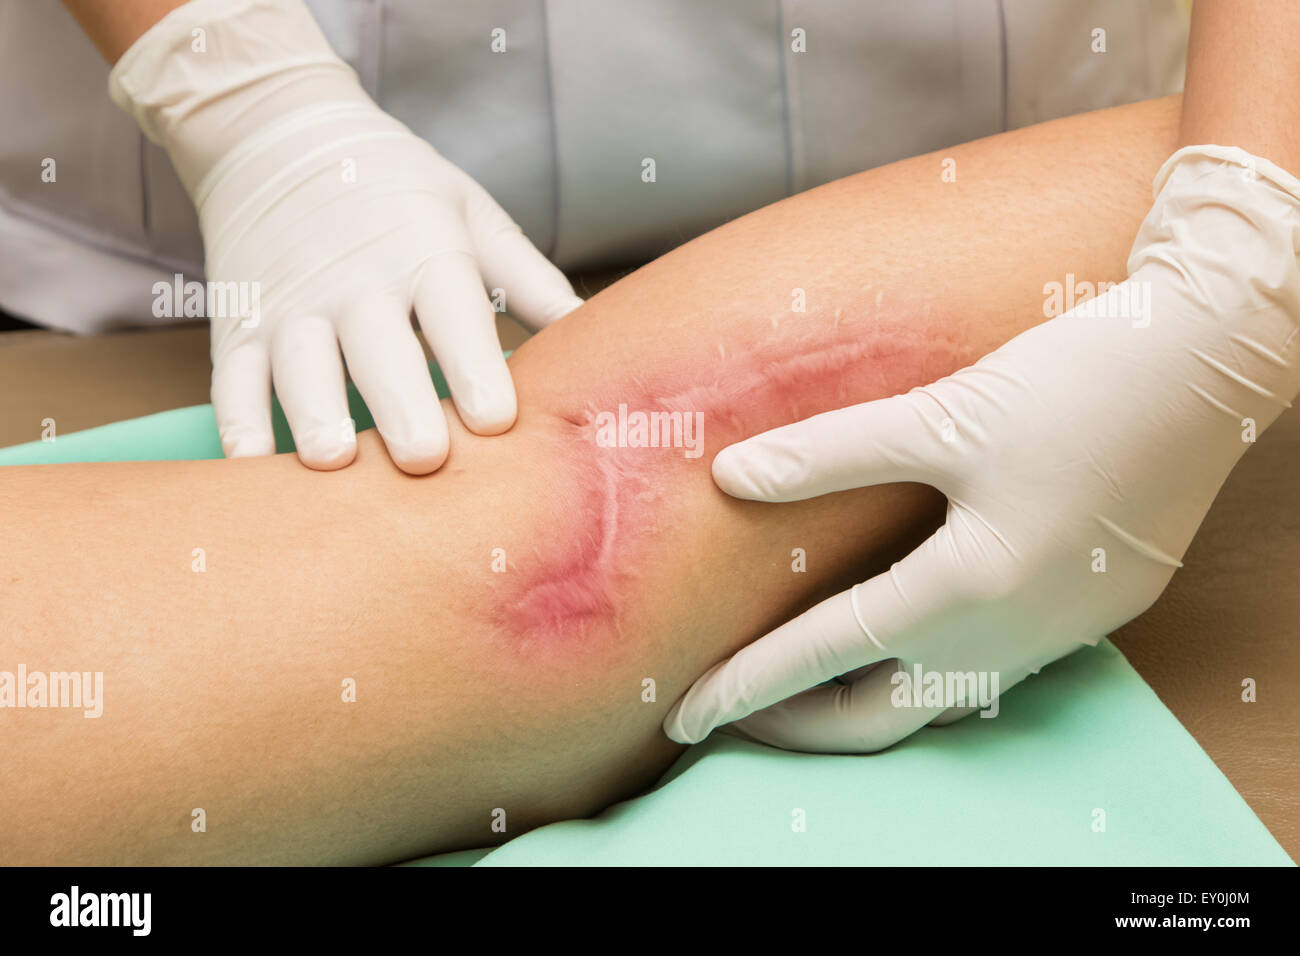 Wound scar on leg after surgery Stock Photo